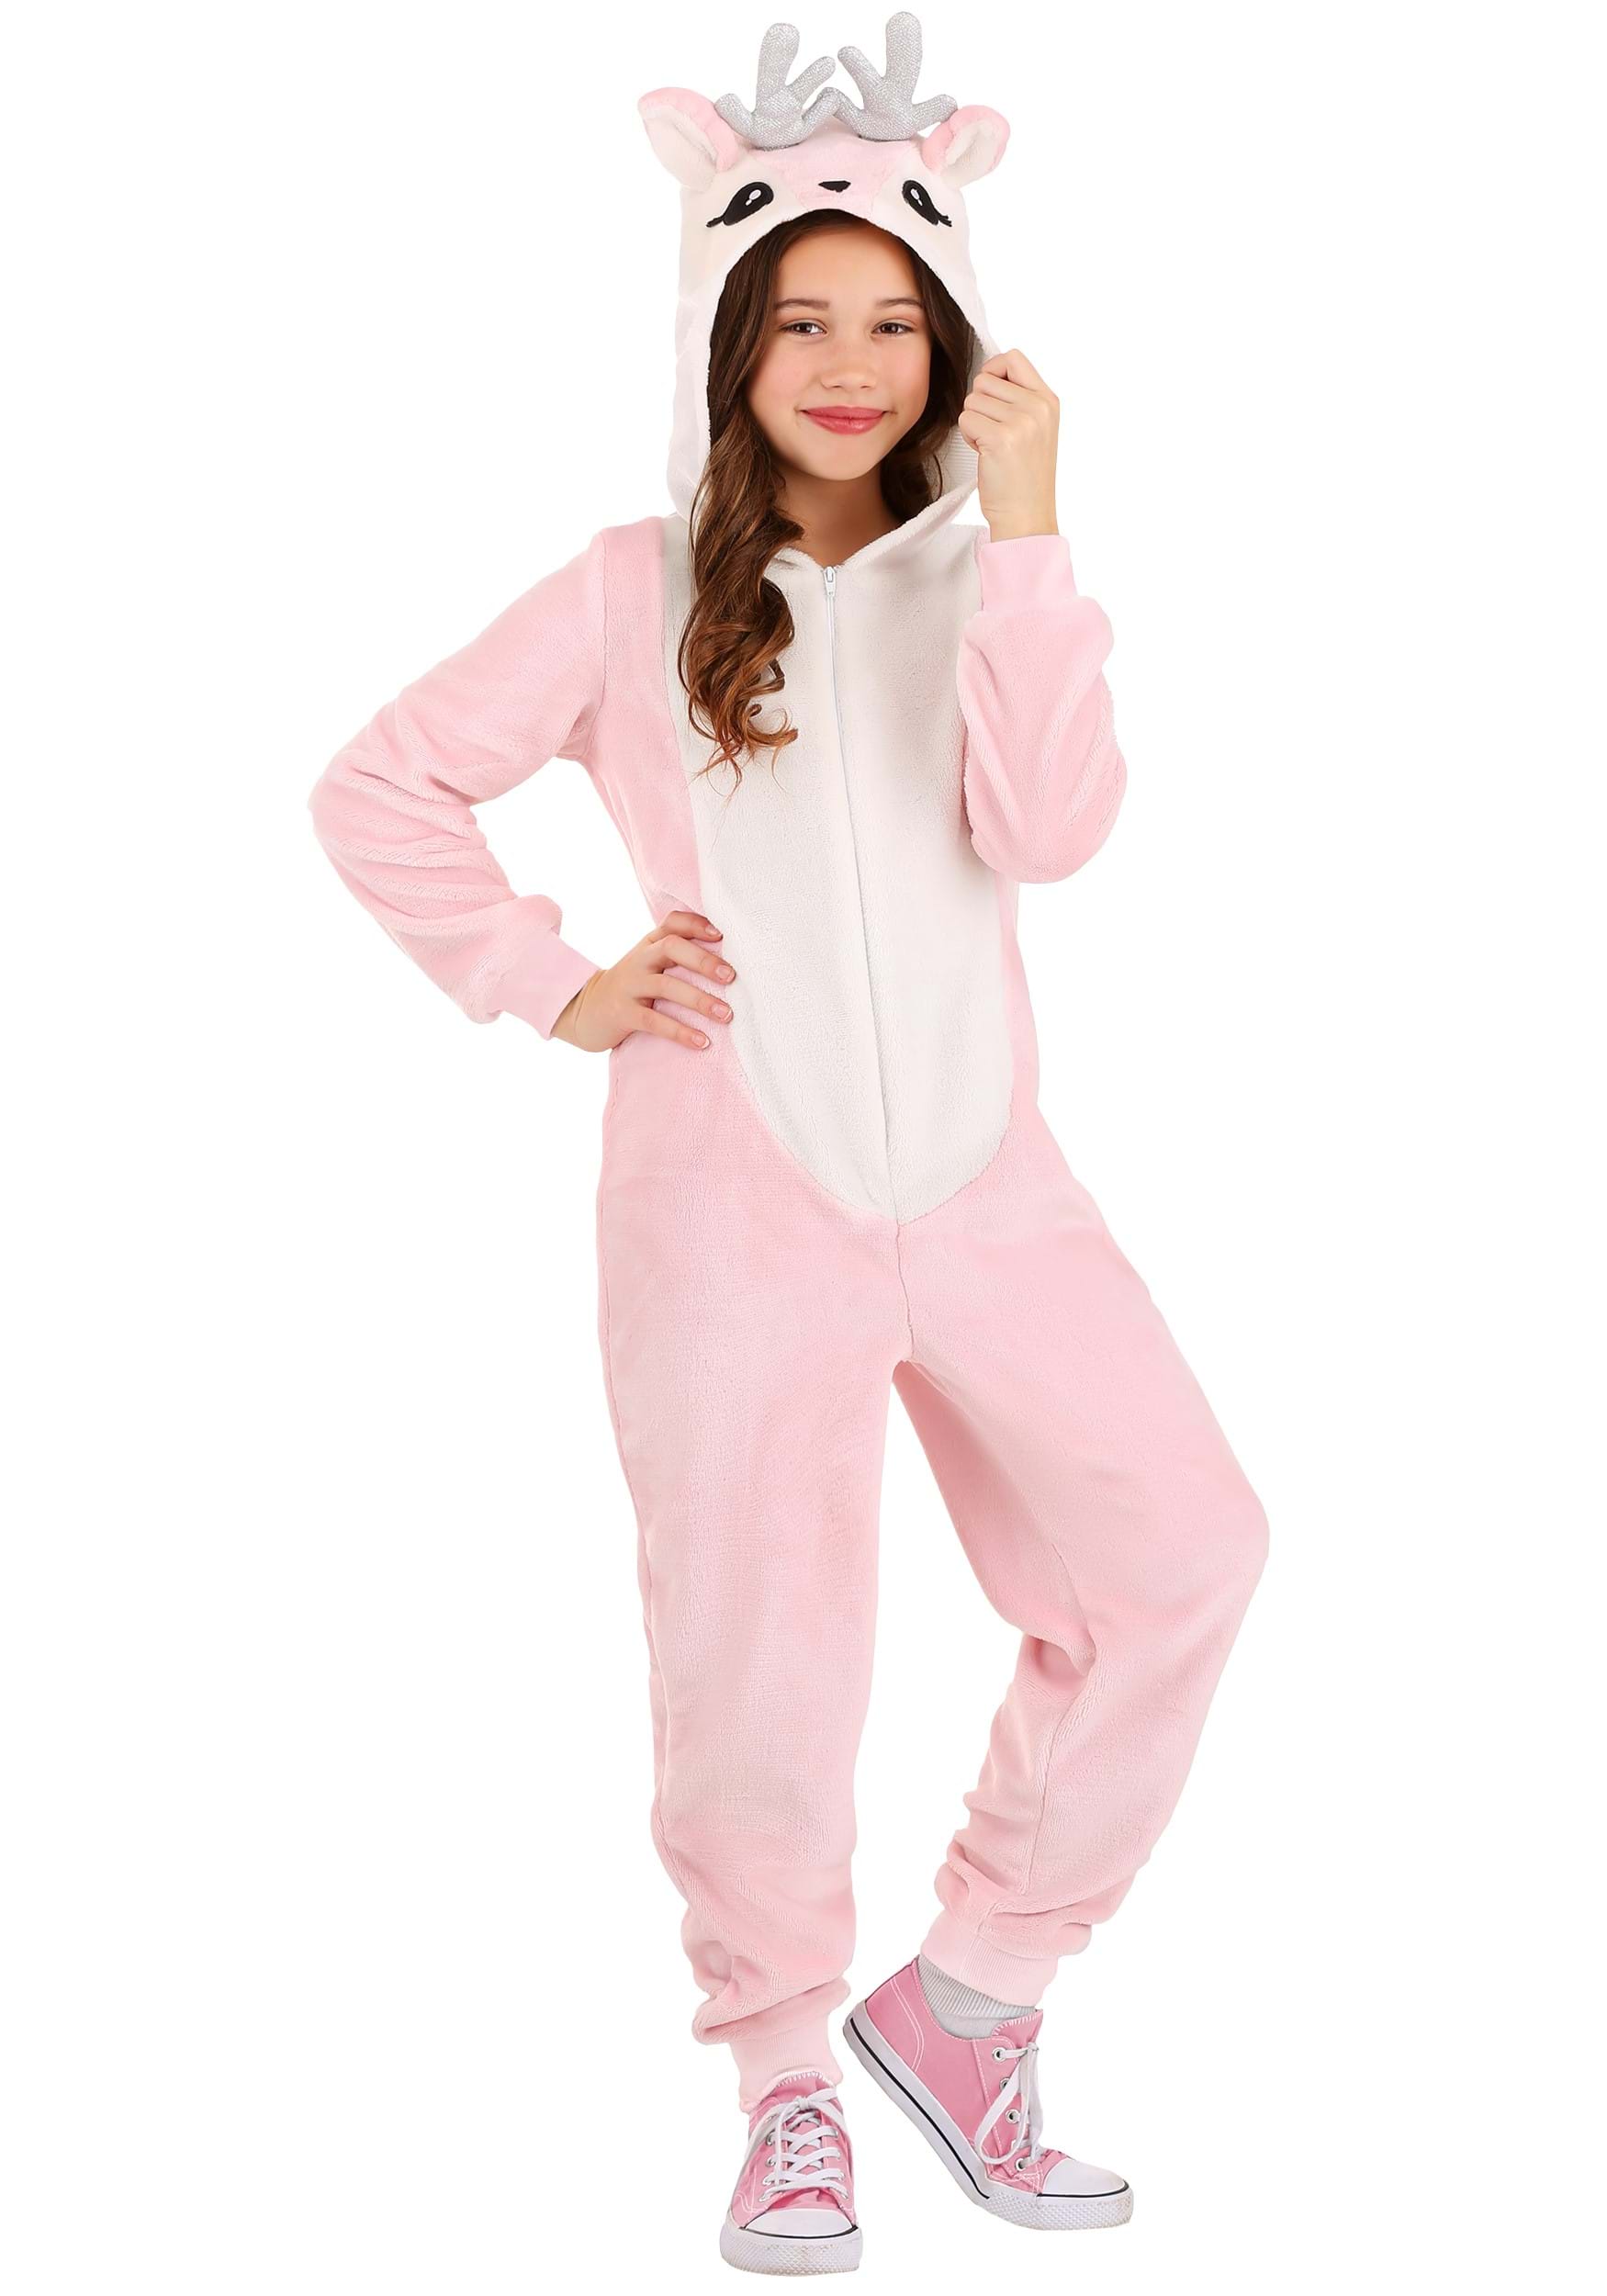 Photos - Fancy Dress FUN Costumes Pink Deer Hooded Girl's Costume Pink/White FUN7289CH